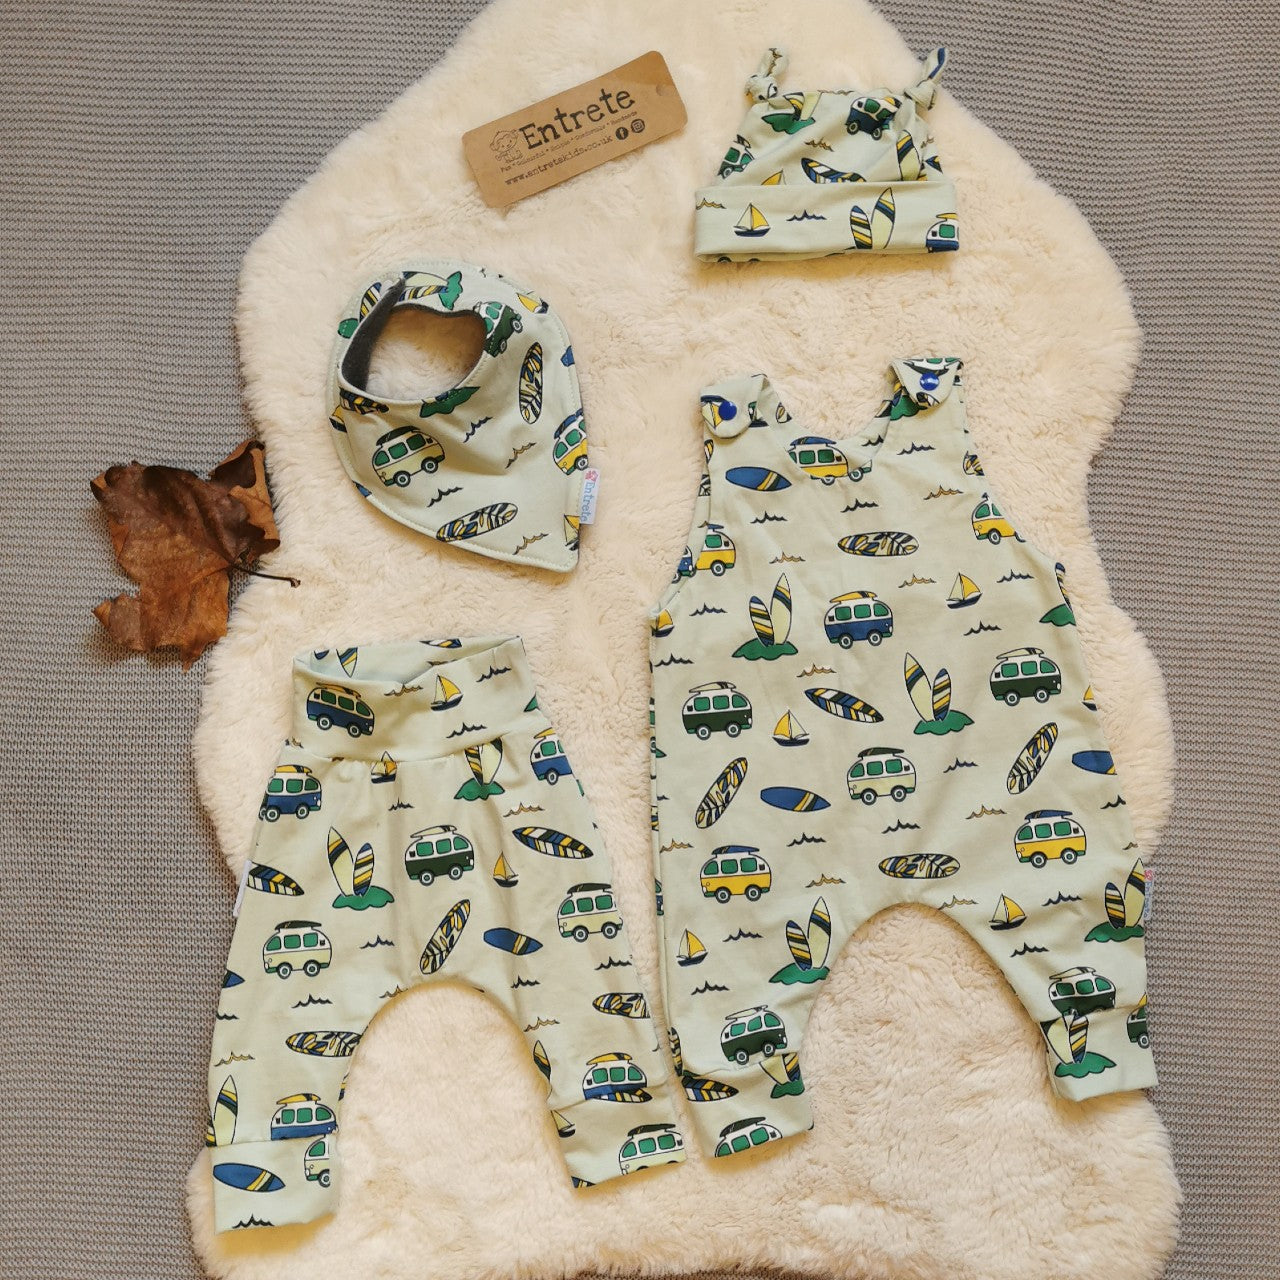 A large baby gift set shown in mint surf campervans for demonstration purposes, your gift set will be handmade using feathers cotton jersey.